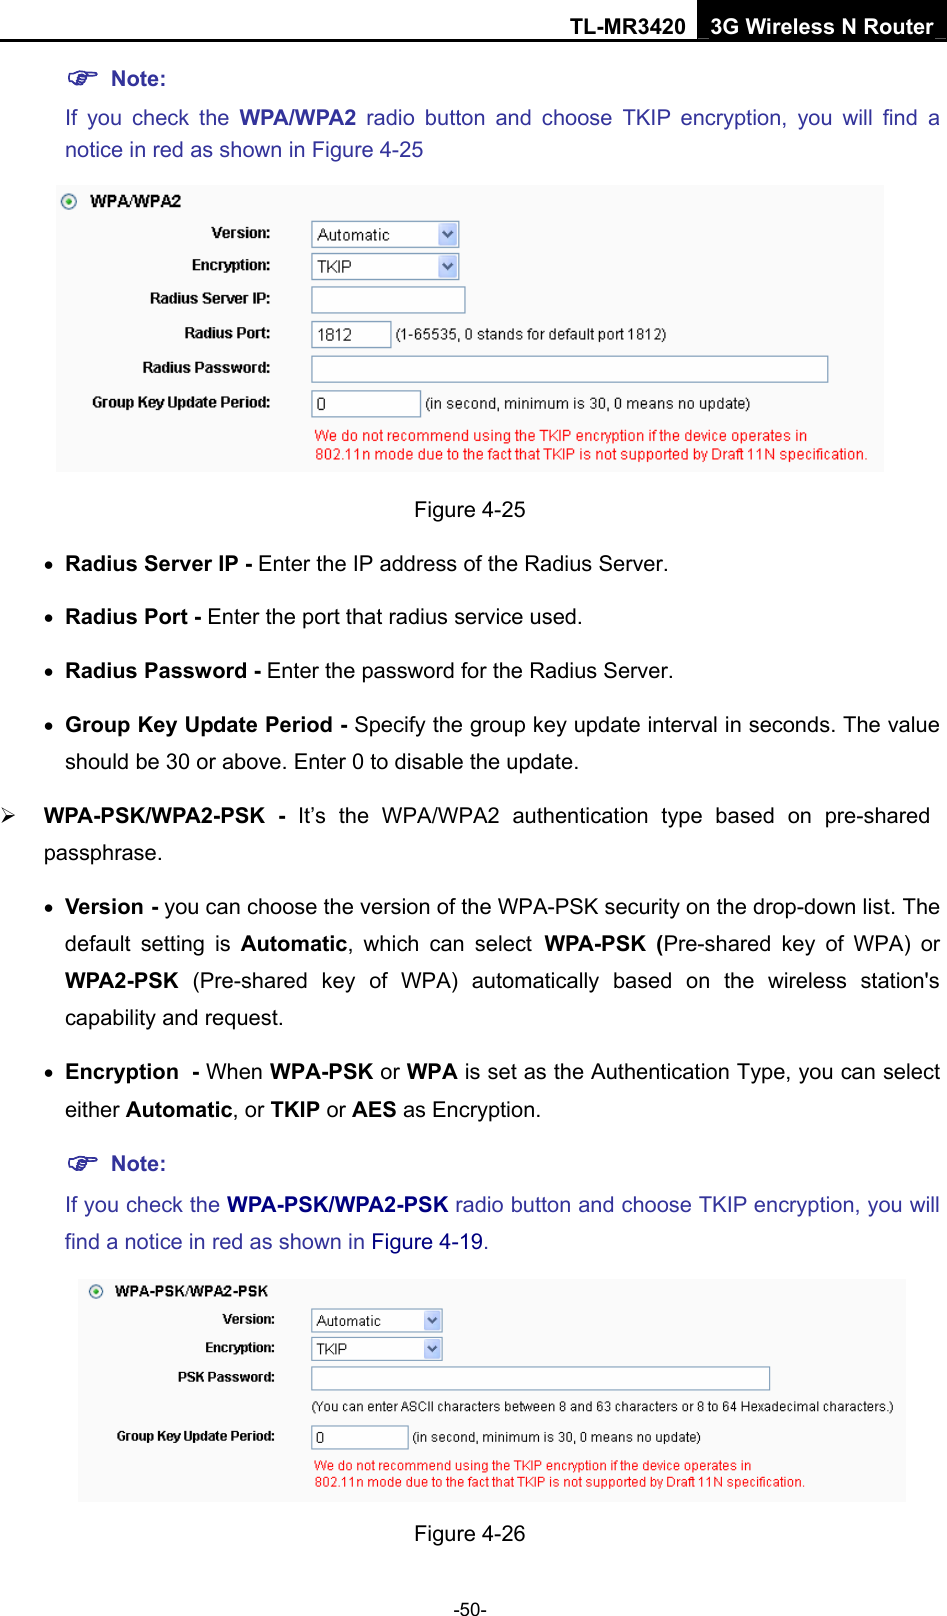 TL-MR3420 3G Wireless N Router -50- ) Note:  If you check the WPA/WPA2 radio button and choose TKIP encryption, you will find a notice in red as shown in Figure 4-25  Figure 4-25 • Radius Server IP - Enter the IP address of the Radius Server. • Radius Port - Enter the port that radius service used. • Radius Password - Enter the password for the Radius Server. • Group Key Update Period - Specify the group key update interval in seconds. The value should be 30 or above. Enter 0 to disable the update. ¾ WPA-PSK/WPA2-PSK - It’s the WPA/WPA2 authentication type based on pre-shared passphrase.  • Version - you can choose the version of the WPA-PSK security on the drop-down list. The default setting is Automatic, which can select WPA-PSK (Pre-shared key of WPA) or WPA2-PSK  (Pre-shared key of WPA) automatically based on the wireless station&apos;s capability and request. • Encryption - When WPA-PSK or WPA is set as the Authentication Type, you can select either Automatic, or TKIP or AES as Encryption. ) Note:  If you check the WPA-PSK/WPA2-PSK radio button and choose TKIP encryption, you will find a notice in red as shown in Figure 4-19.  Figure 4-26 